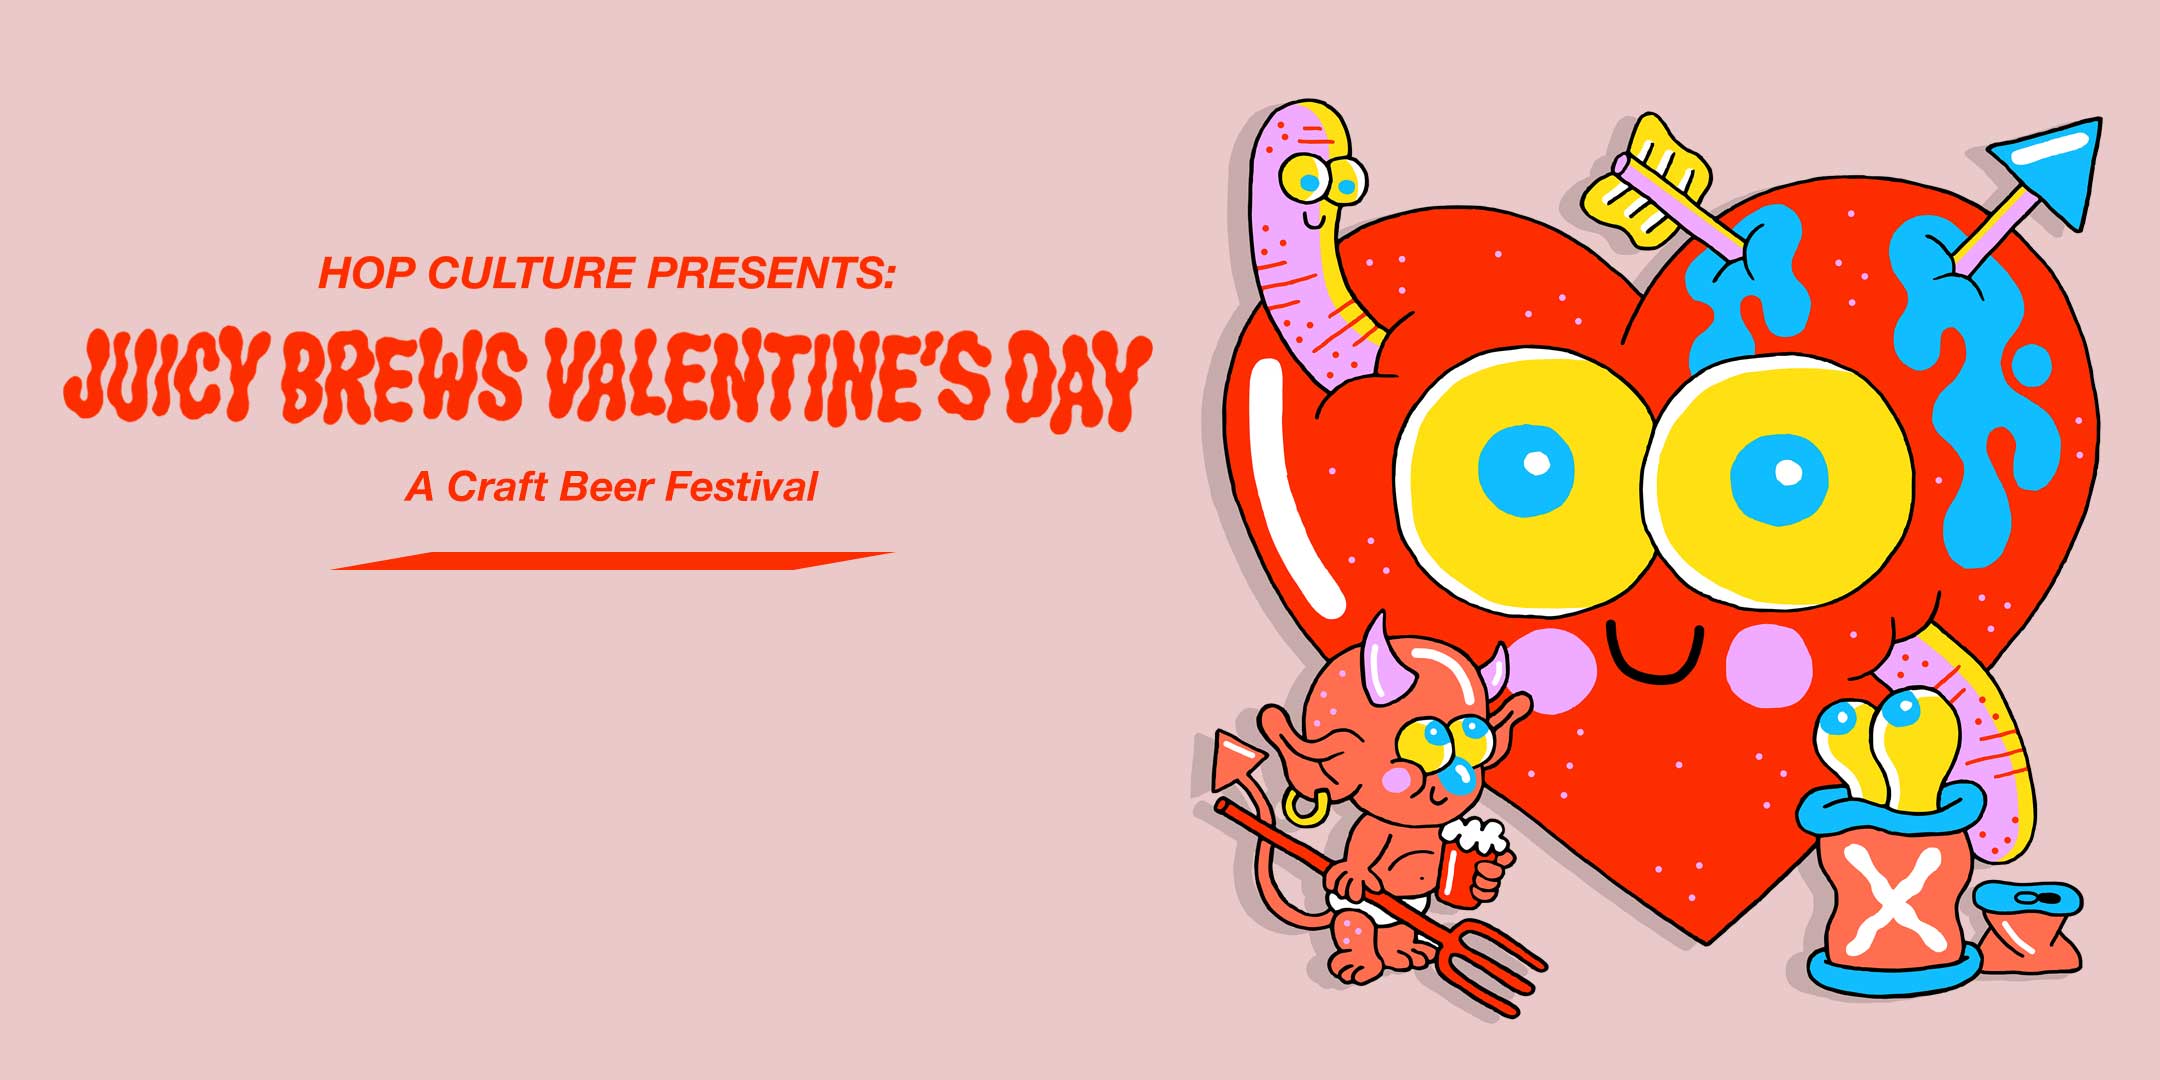 Hop Culture Presents Week of Events for Juicy Brews Valentine’s Day